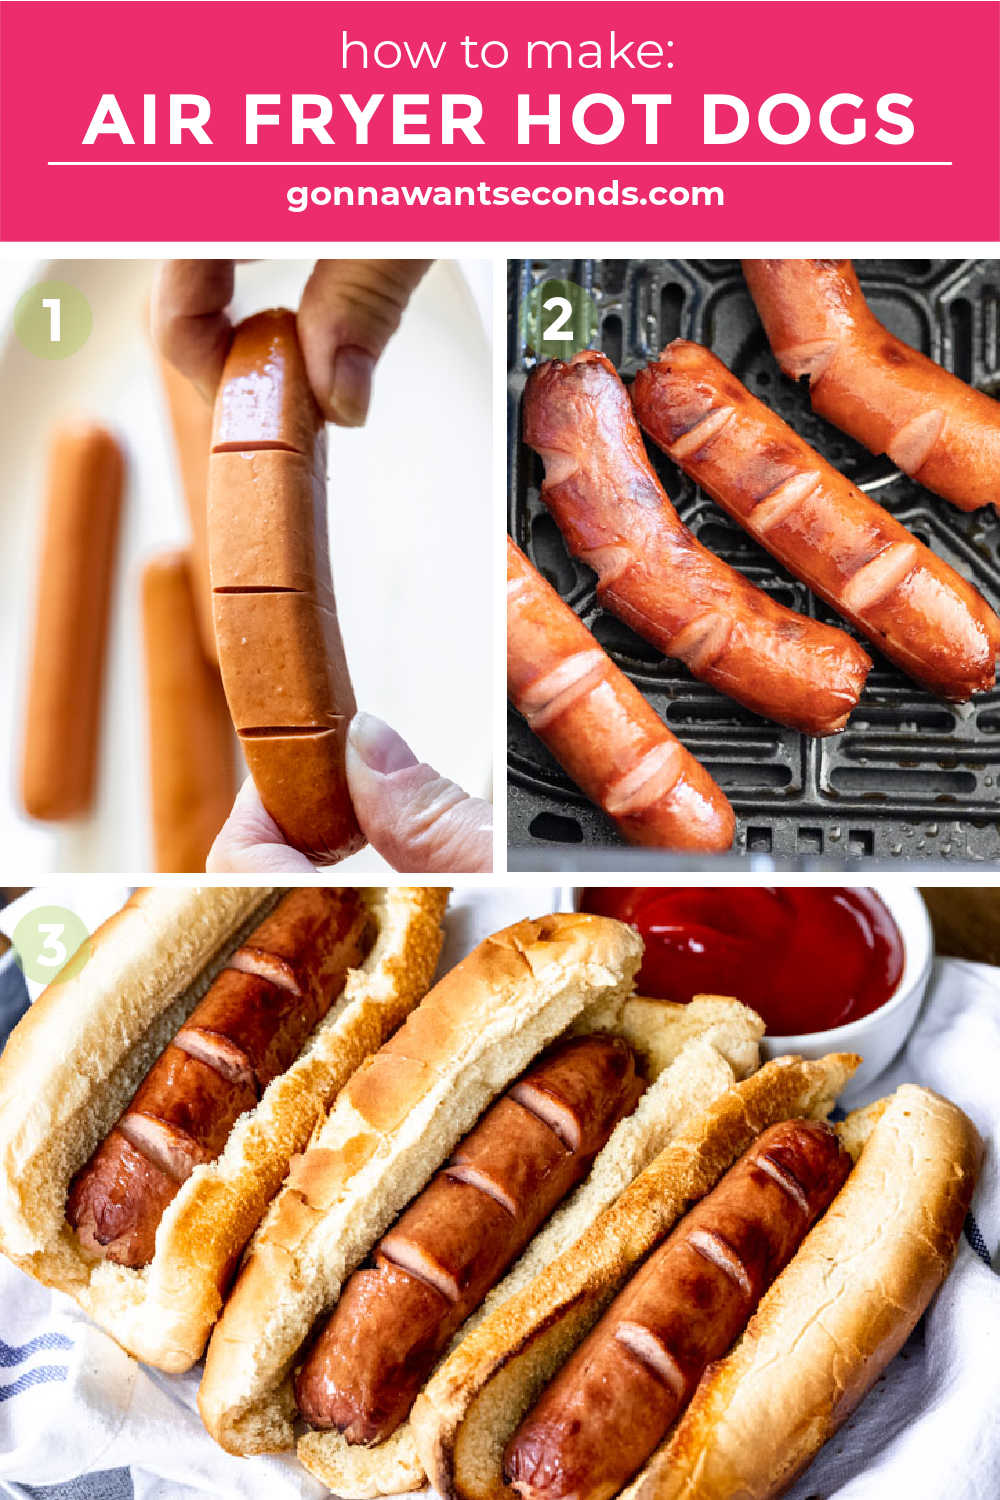 Step by step How to make air fryer hot dogs